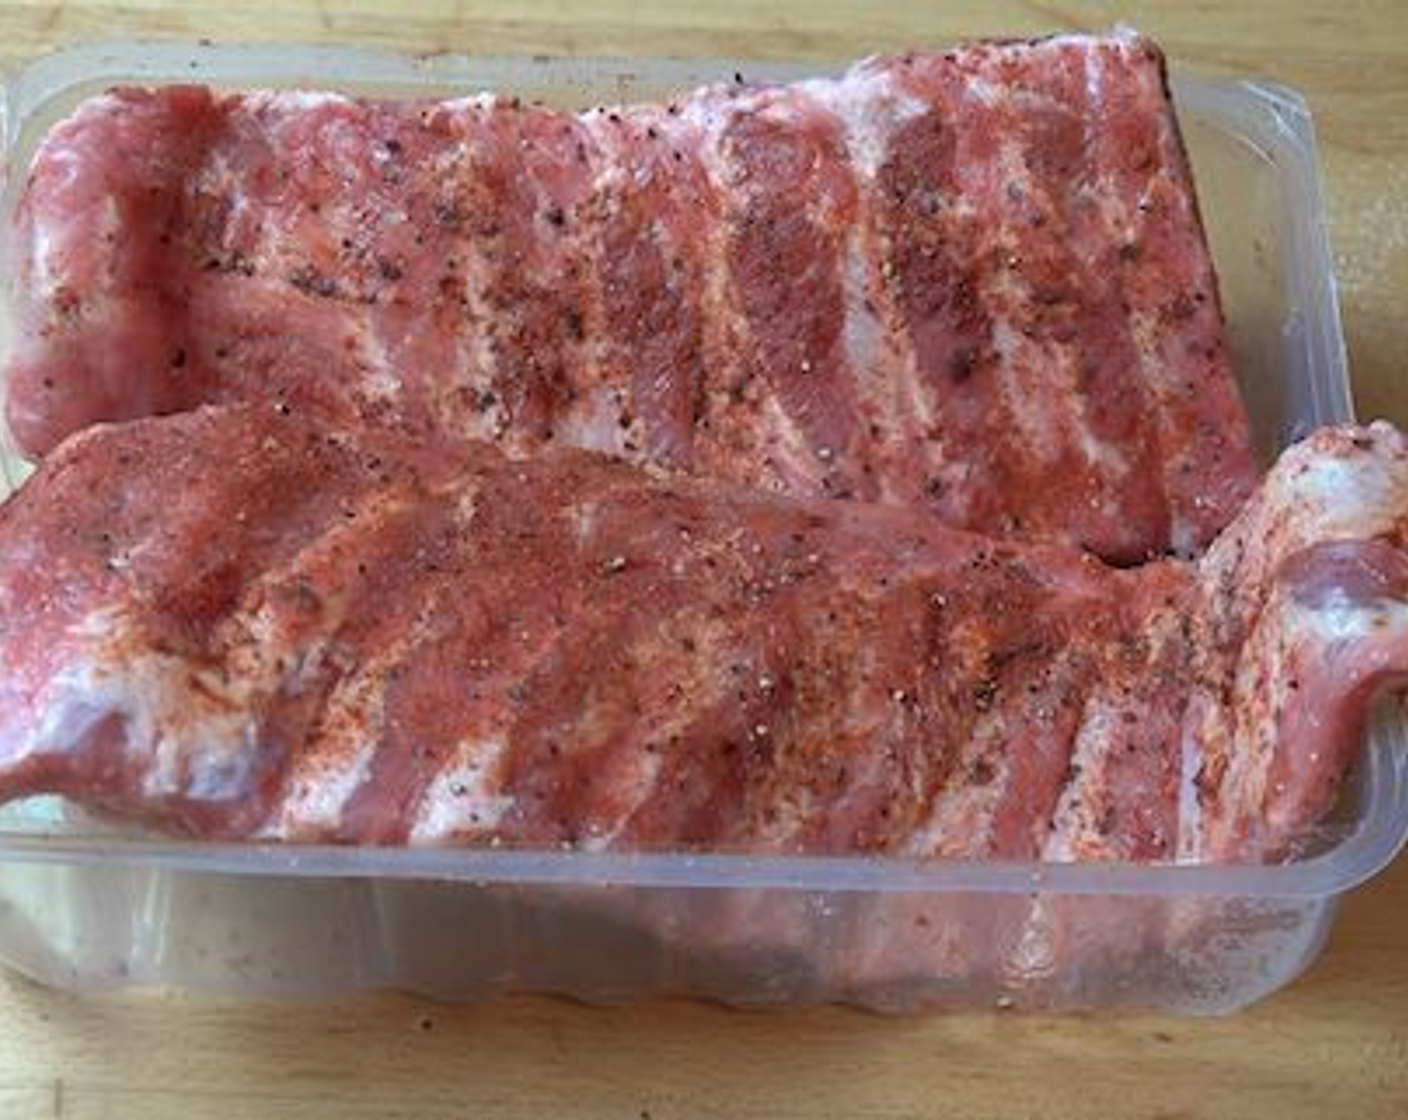 step 1 Start by seasoning the Pork Ribs (2.2 lb) with Salt (to taste), Ground Black Pepper (to taste), and Smoked Paprika (to taste). Use your fingers to rub the seasoning evenly on the ribs, and repeat on the other side.